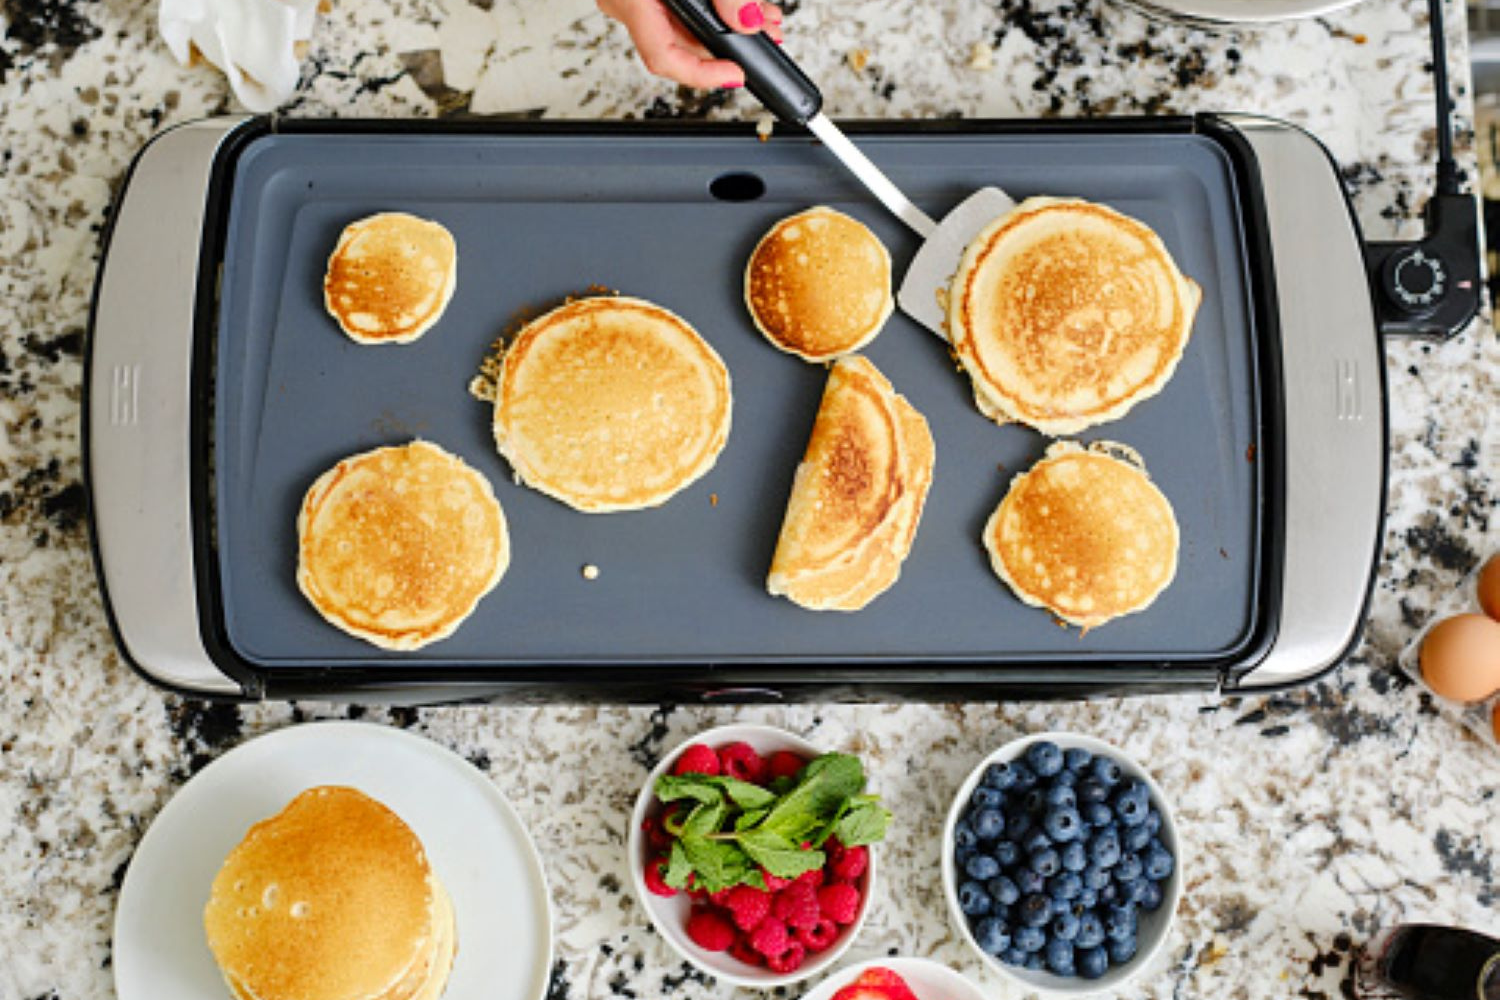 pancakes on a griddle